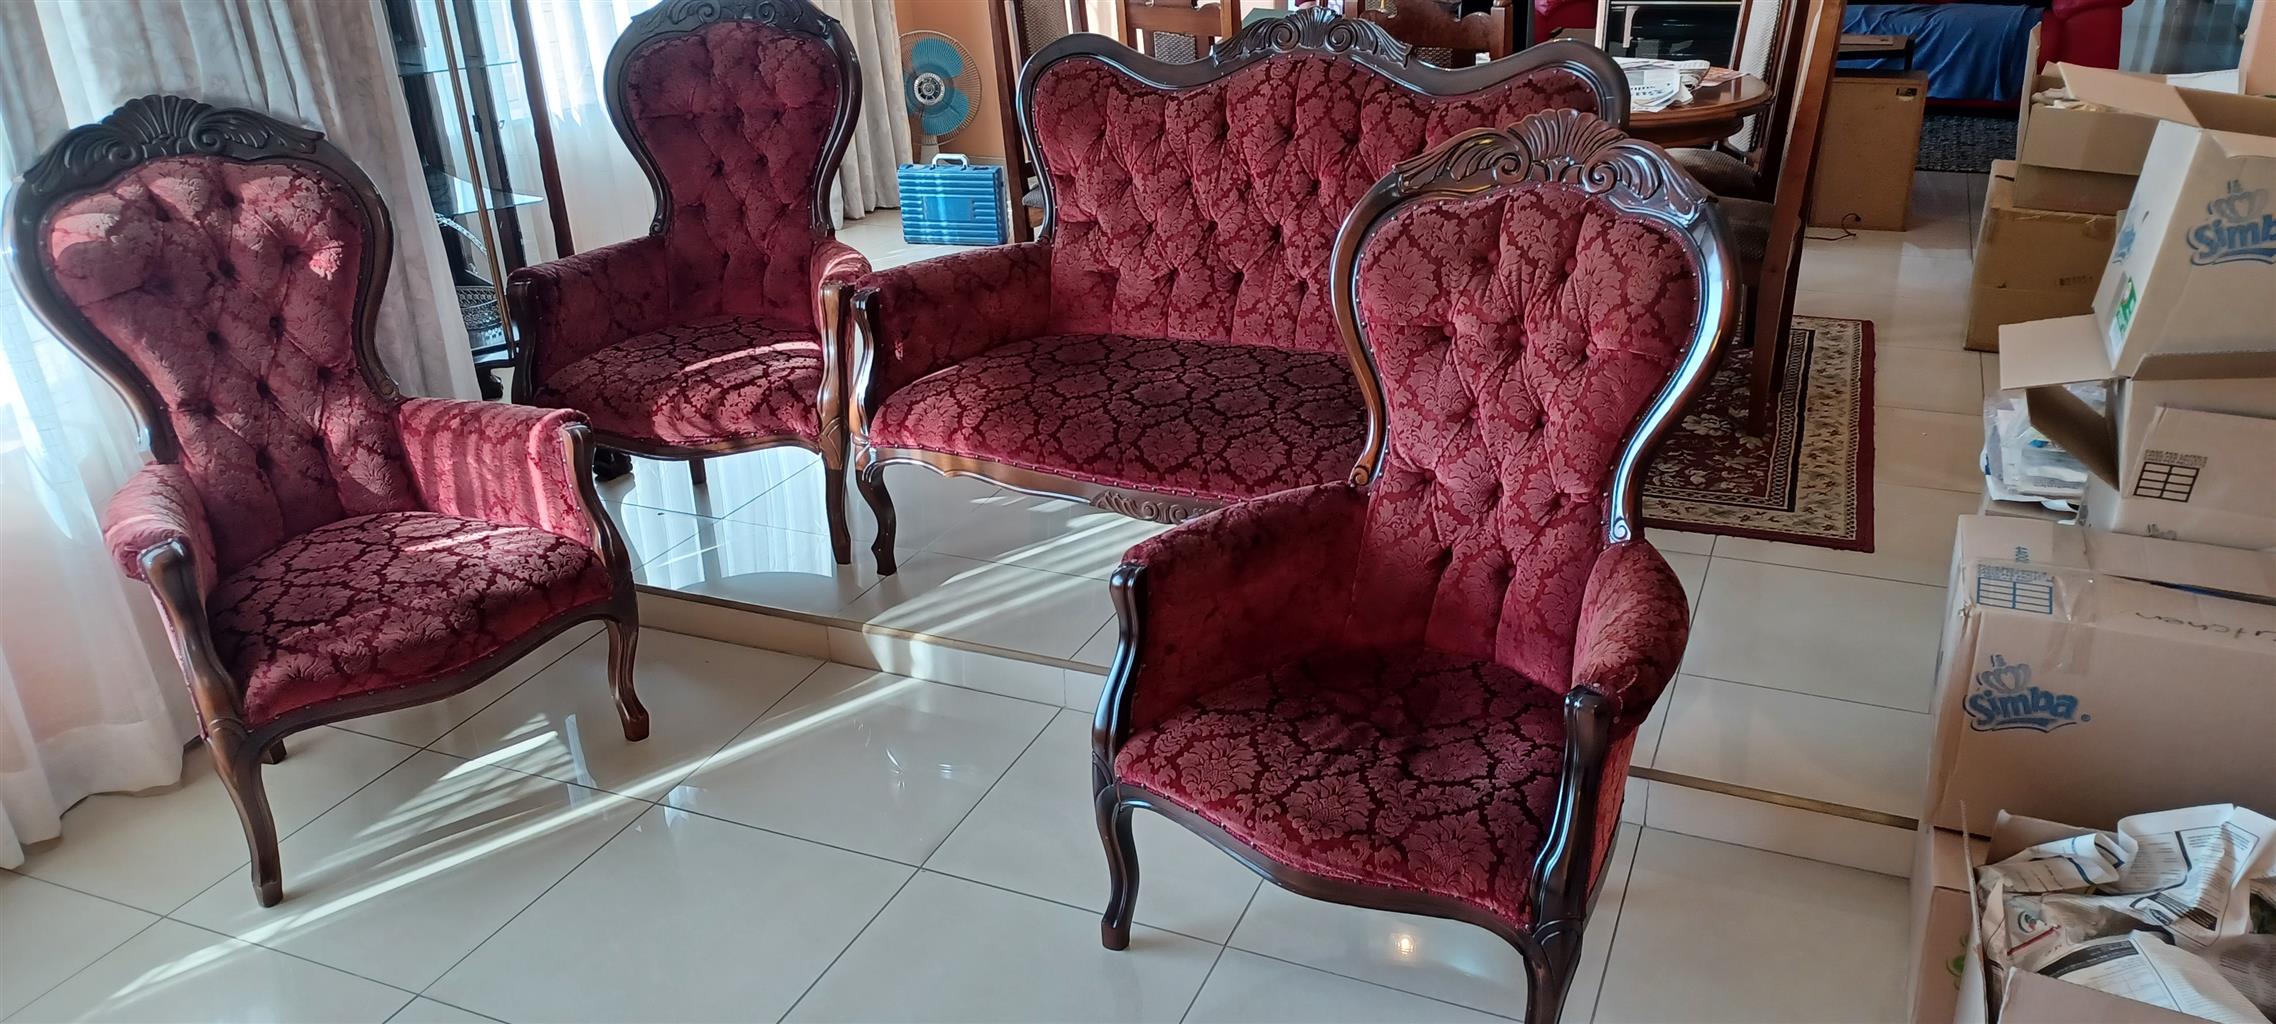 Lounge suite upper leather3,2,1